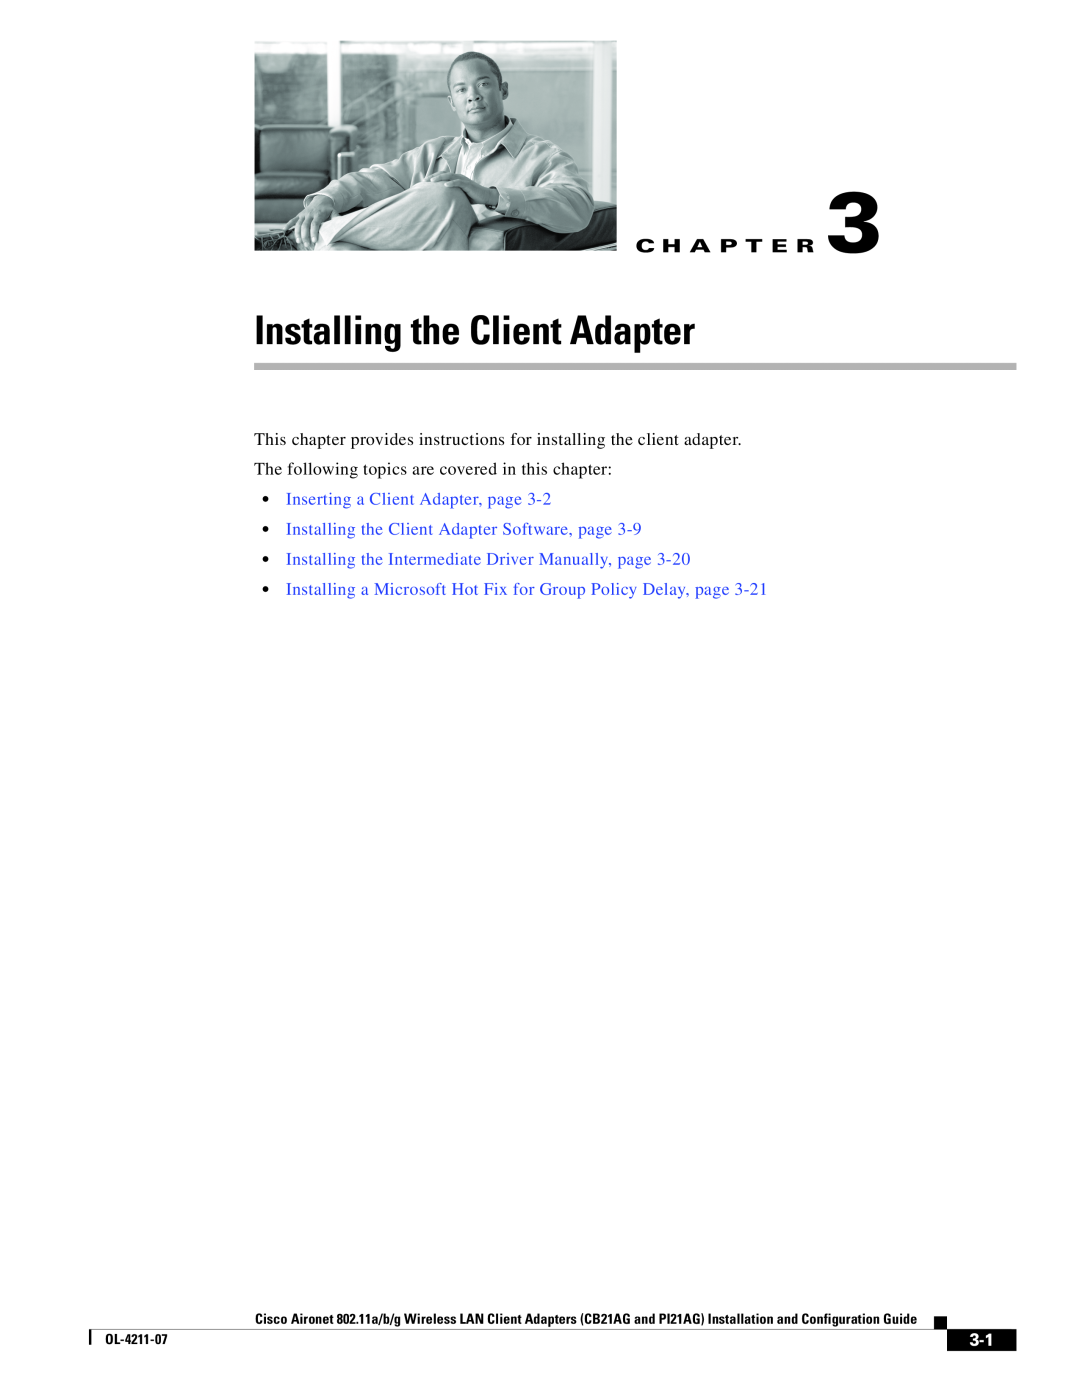 Cisco Systems CB21AG, PI21AG manual Product Overview and Installation, C H A P T E R 